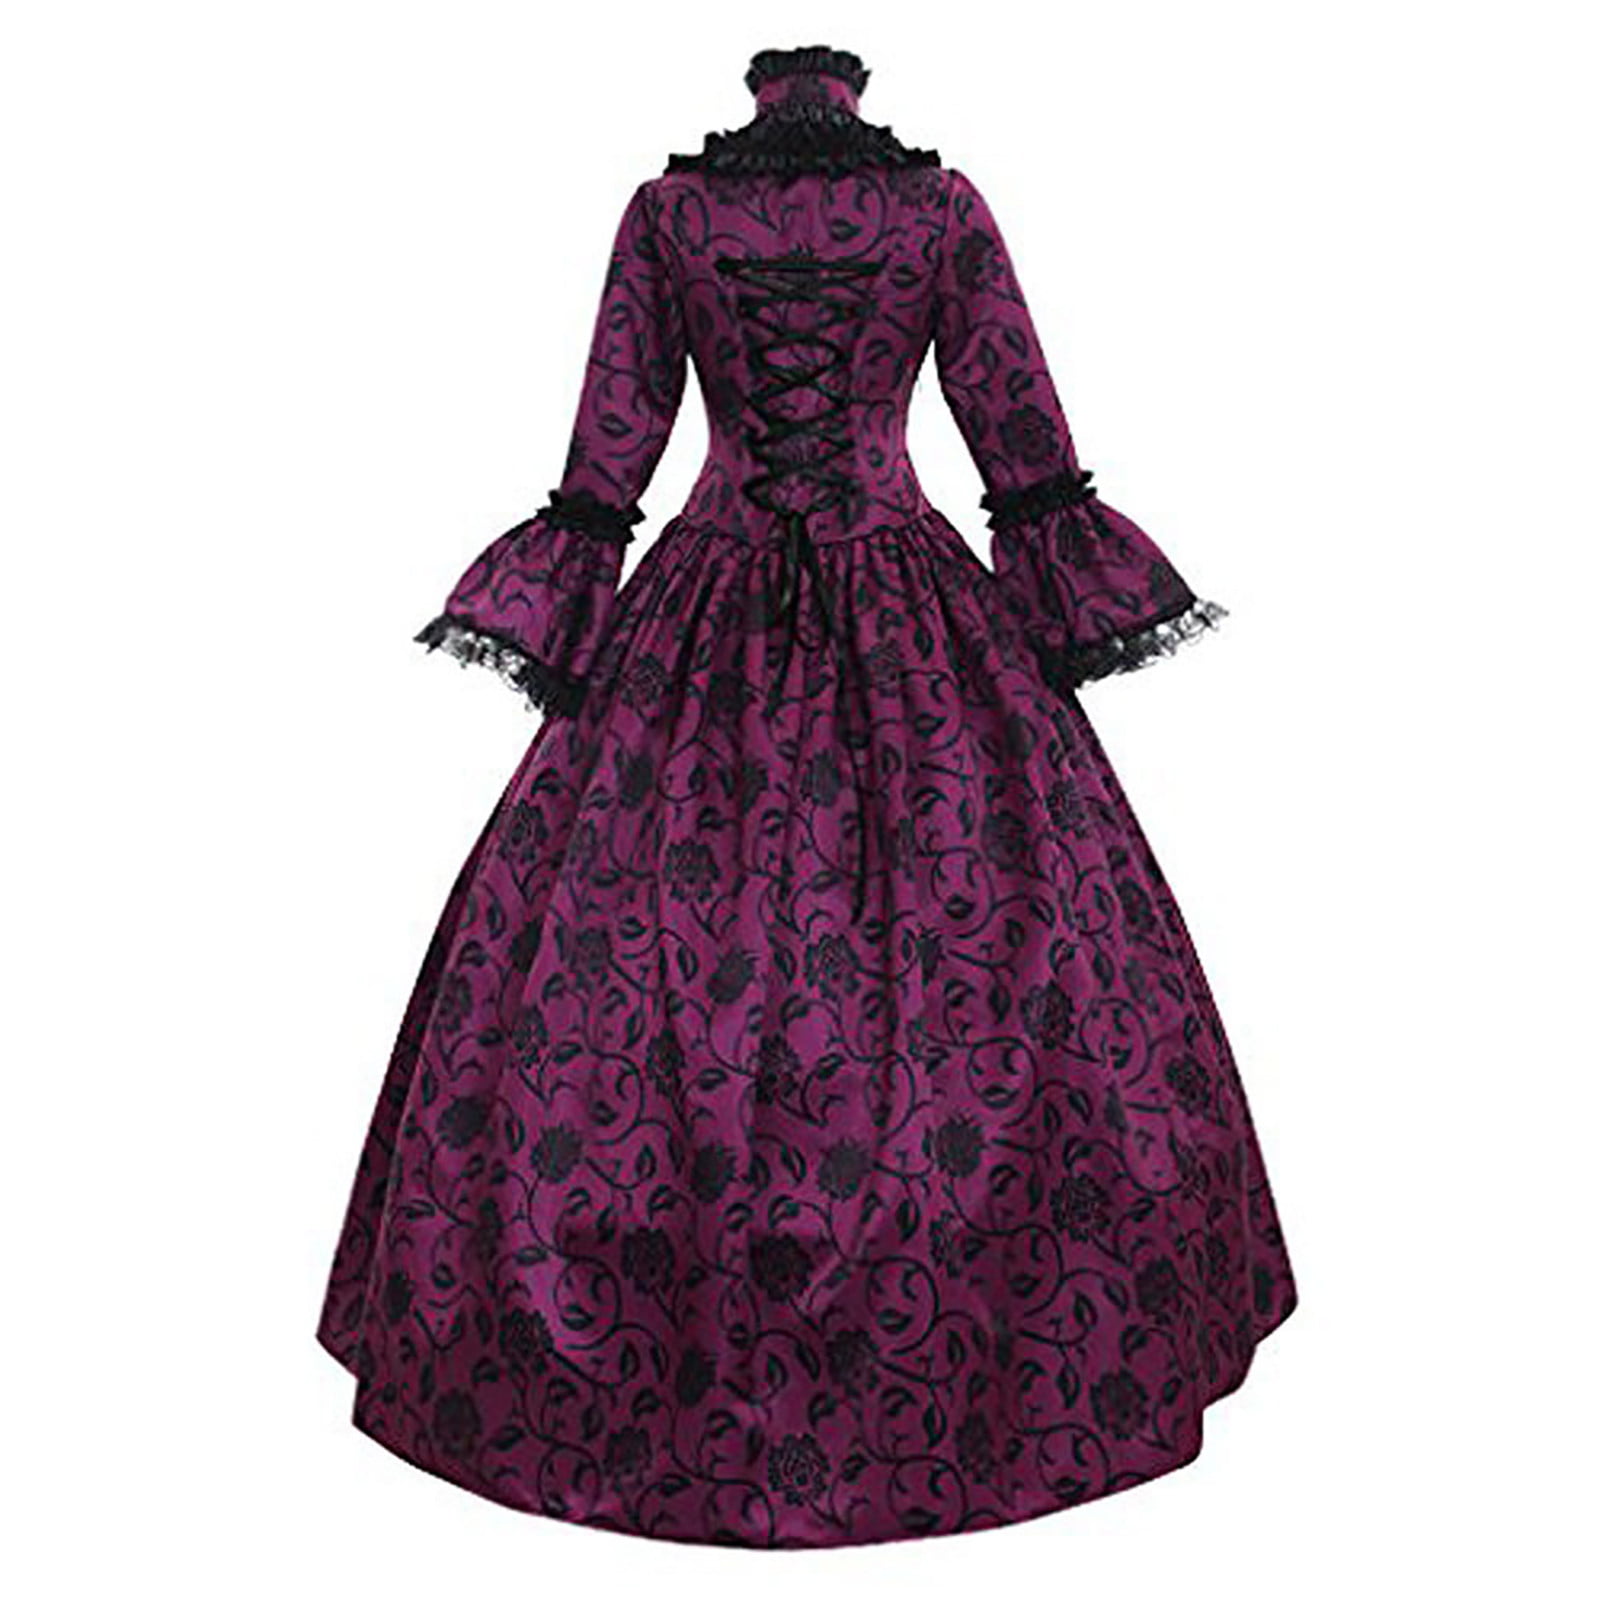 Medieval Regency Dresses For Women Victorian Queen Costume 18th Century Rococo Ball Gown Masquerade Lace Goth Dress Walmart Com